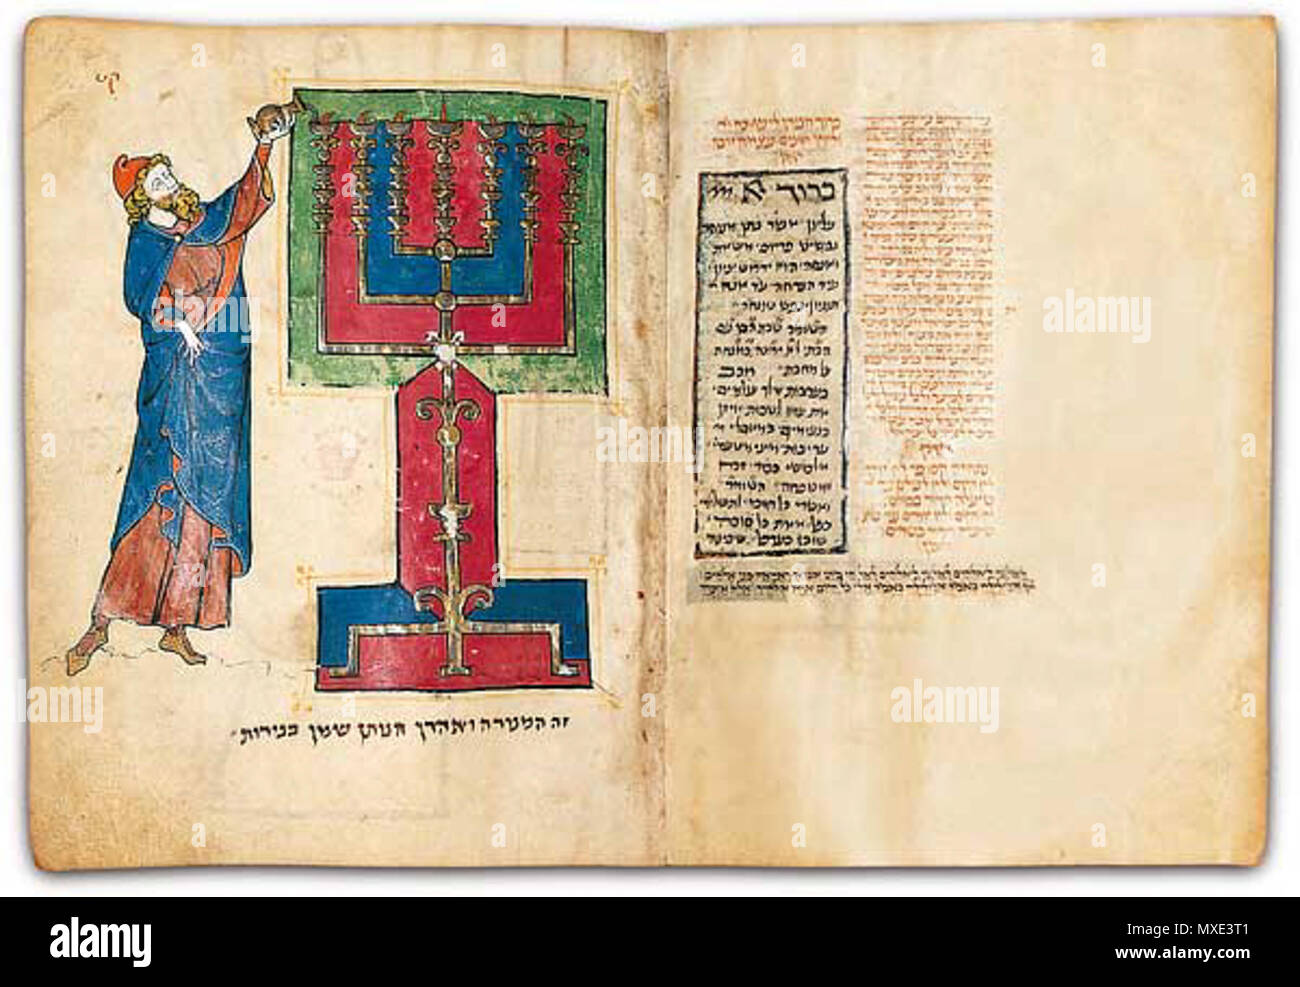 . English: Folios 113b-114a of the North French Hebrew Miscellany manuscript - Aaron as High Priest. Aaron pours oil into the lighted lamps of the Tabernacle menorah, the seven-branched candelabrum. circa 1278-98. Binyamin 449 North French Hebrew Miscellany folio 5B.l Stock Photo